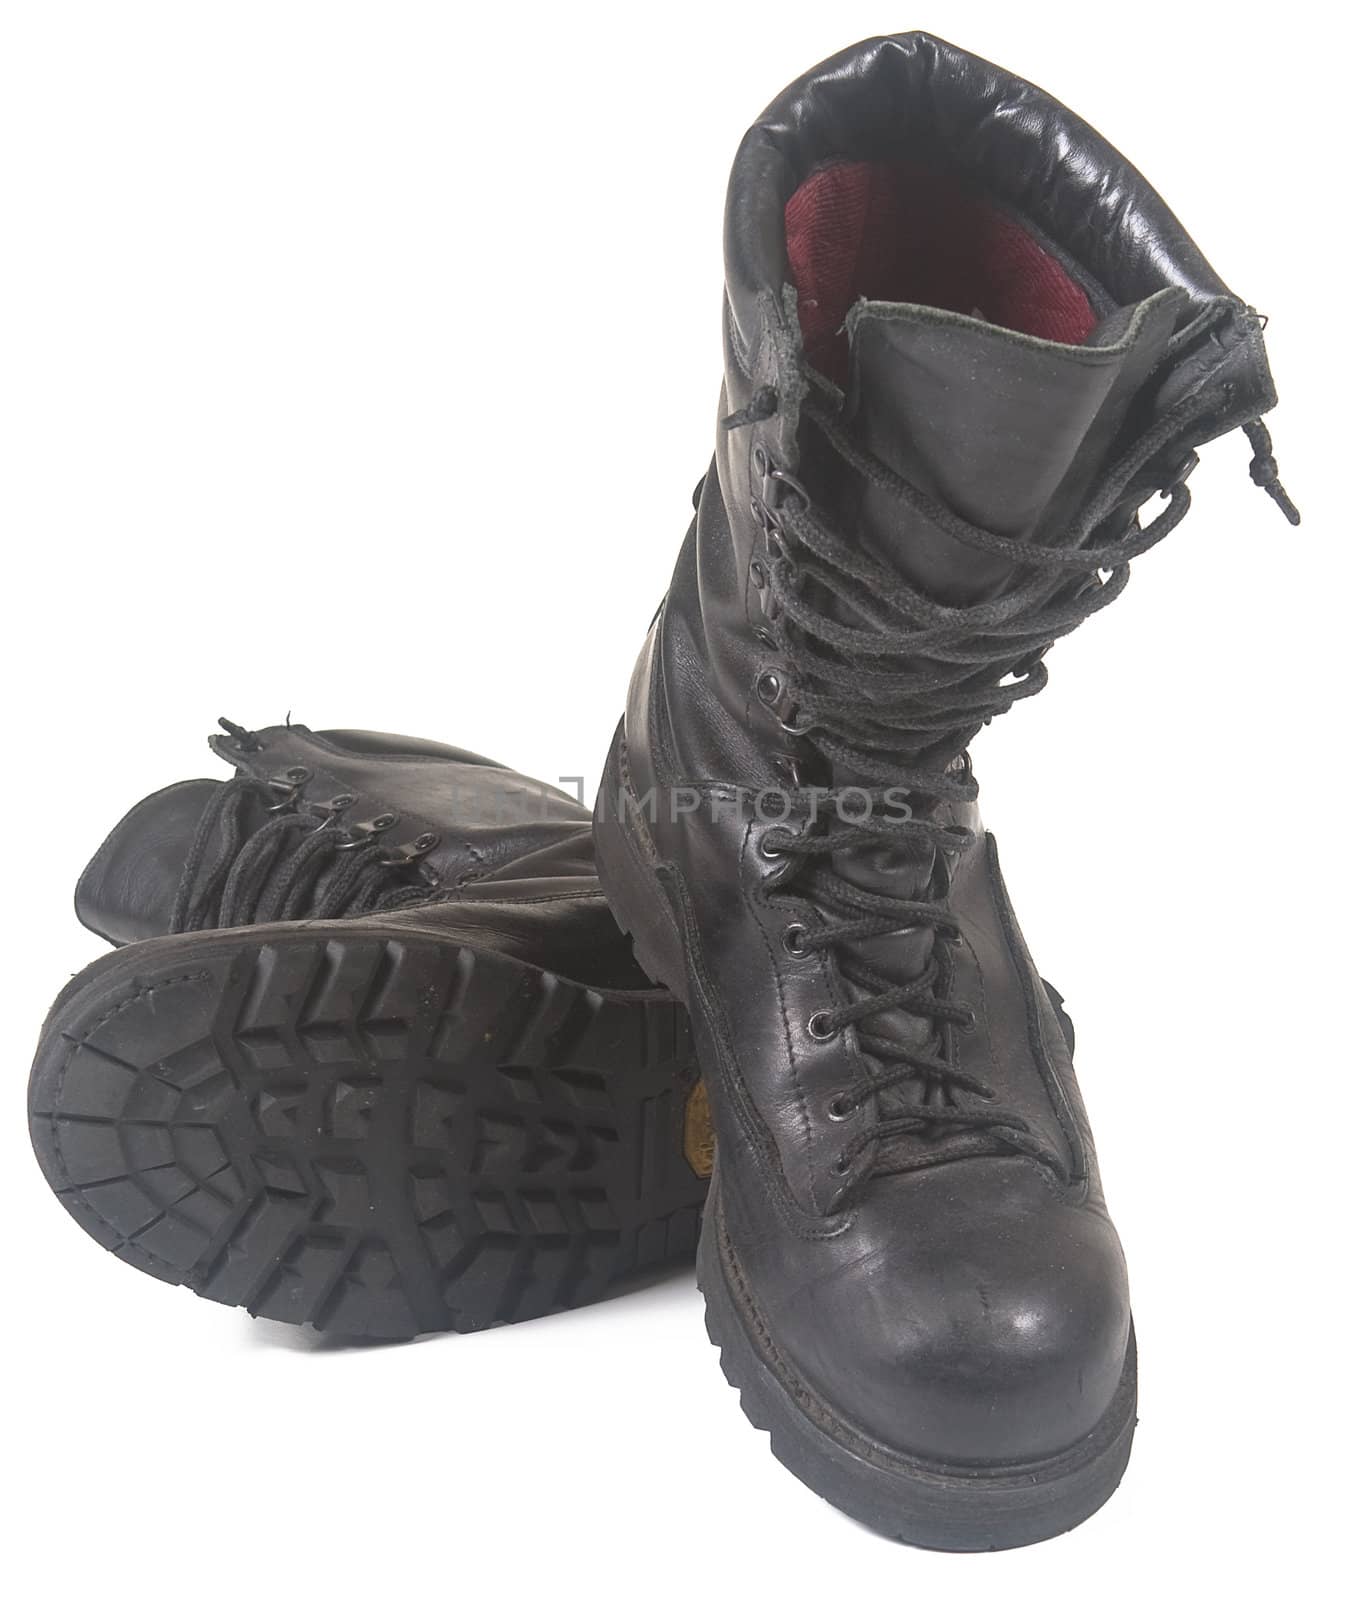 black military leather boots on white background by PPphoto